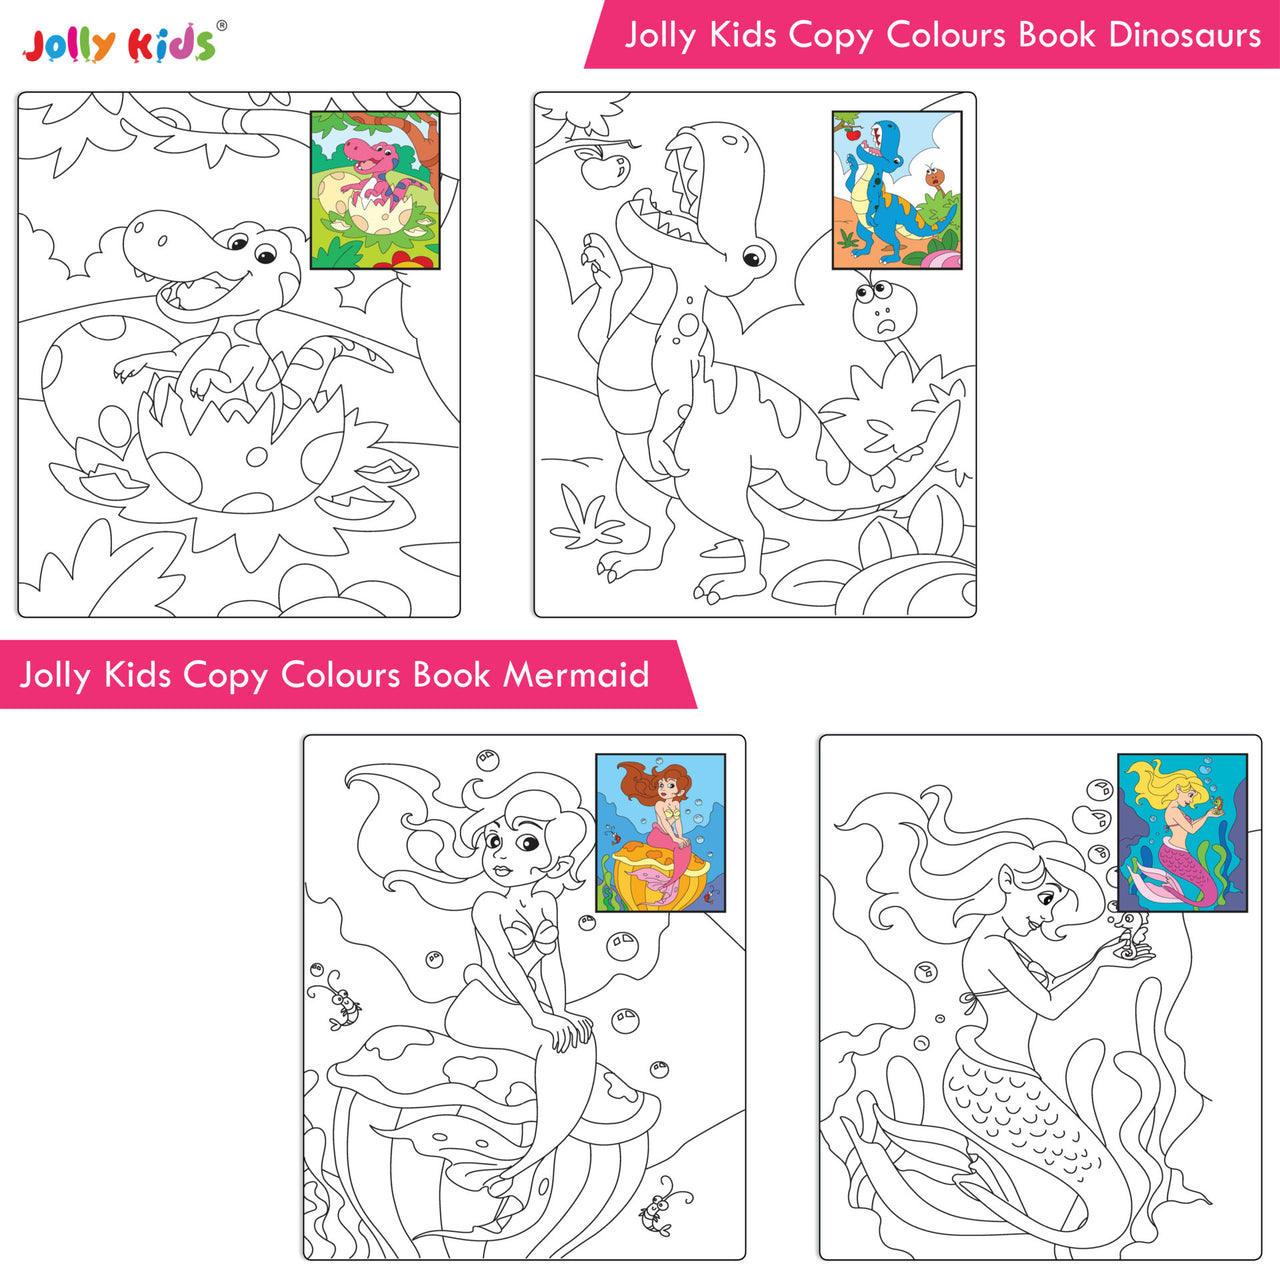 Jolly Kids Copy Colour Books Set of 8| Colouring Books: Animals, Flowers, Dinosaurs, Mermaid, Ocean, Pirates, Princess & Unicorn| Ages 3-10 years - Distacart